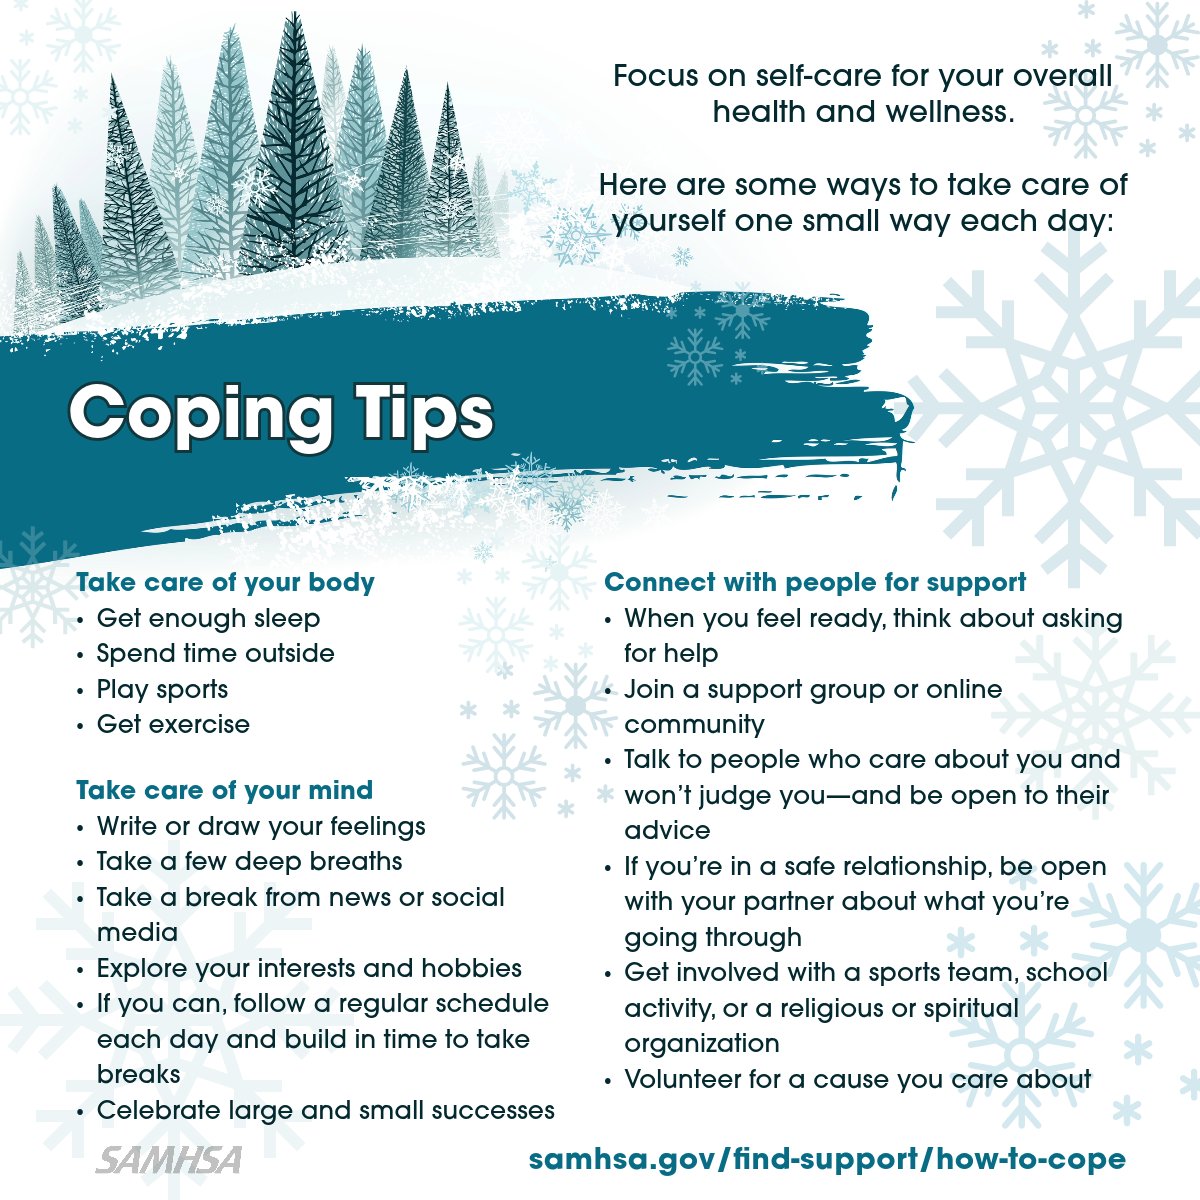 The holiday season can be a difficult and stressful time. That's why it's so important to stop and listen to your own needs, too. Here are some ways to take care of yourself one small way each day: samhsa.gov/find-support/h…